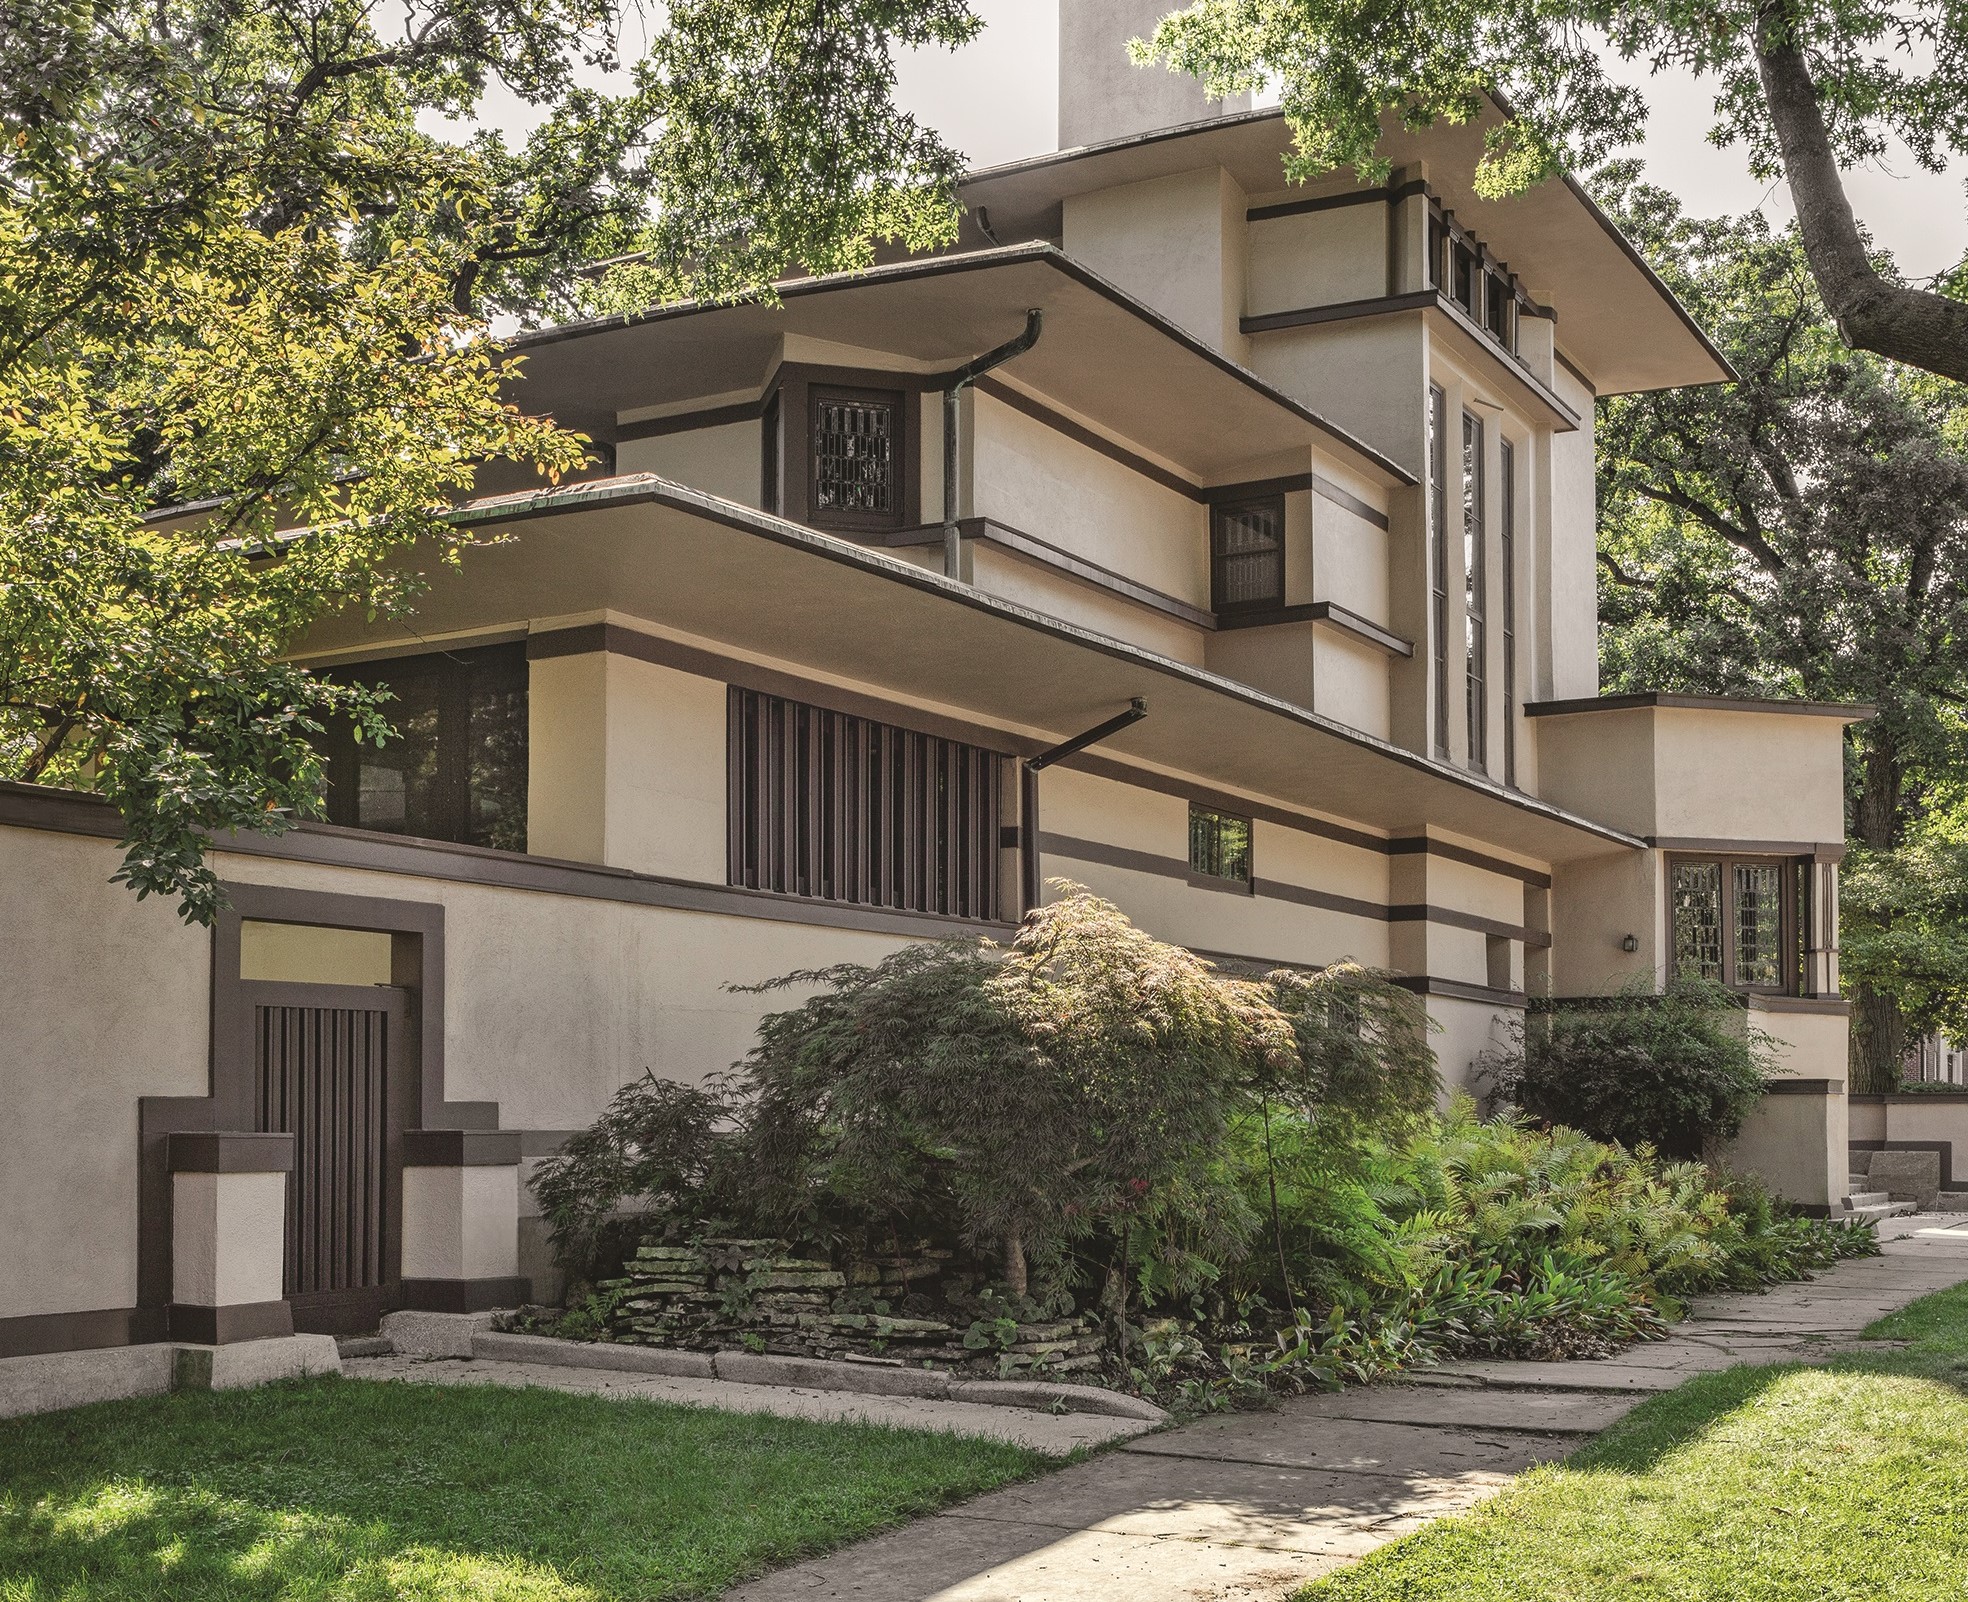 They’ll be joined by four more neighboring homes designed by Wright’s contemporaries.